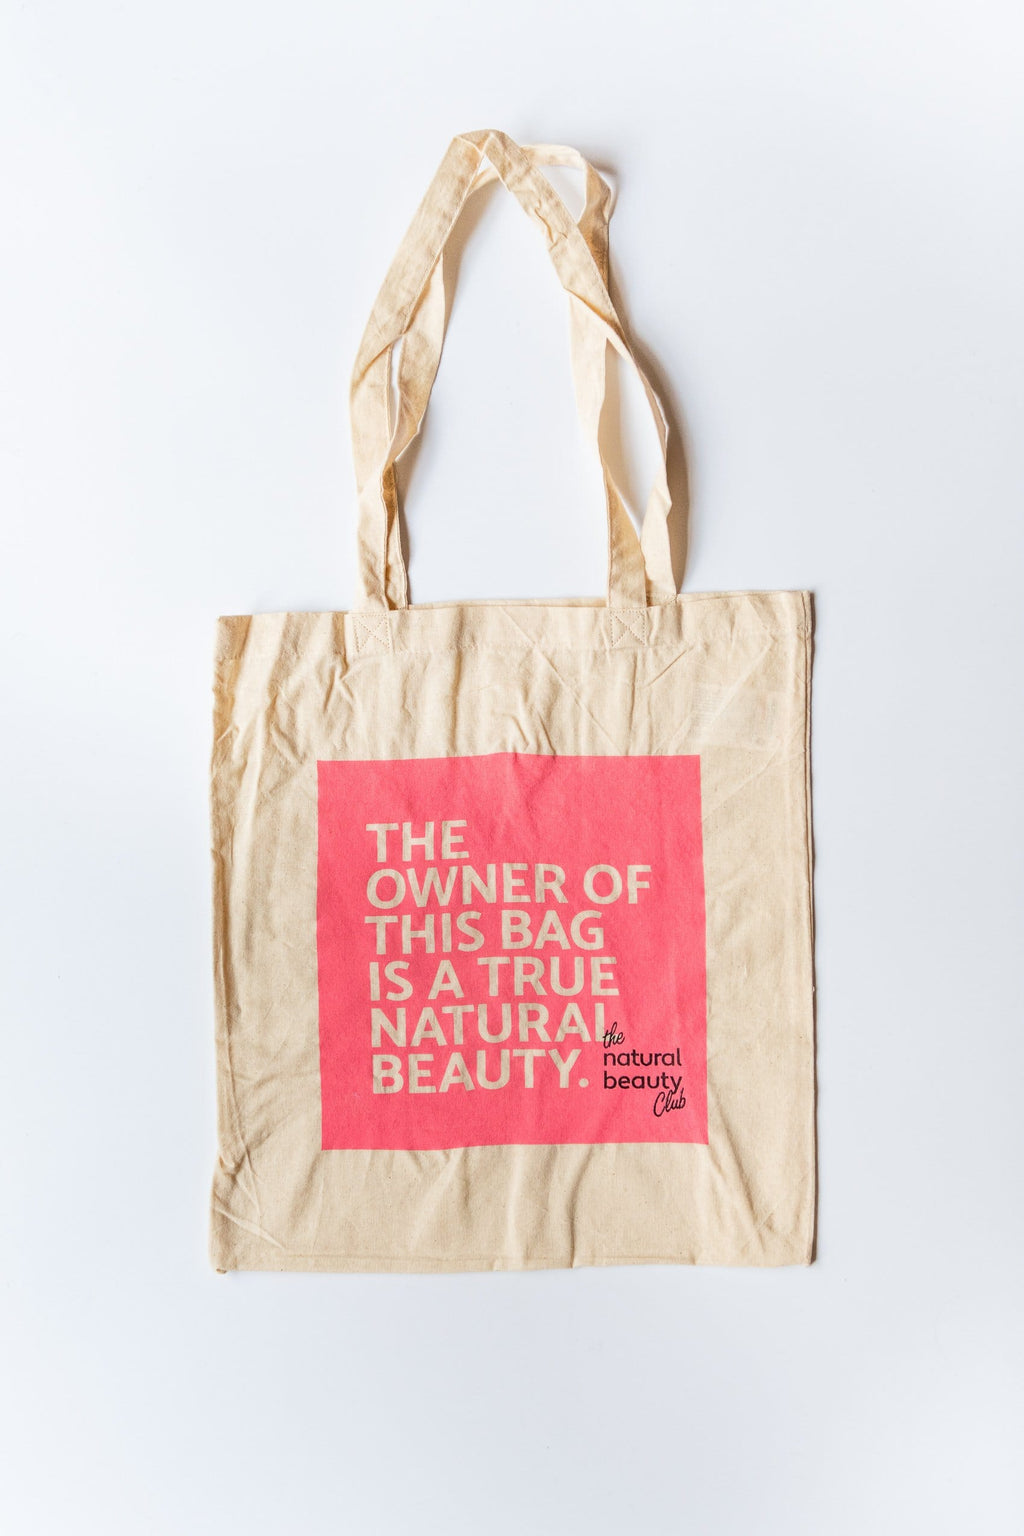 Totebag - The Natural Beauty Club